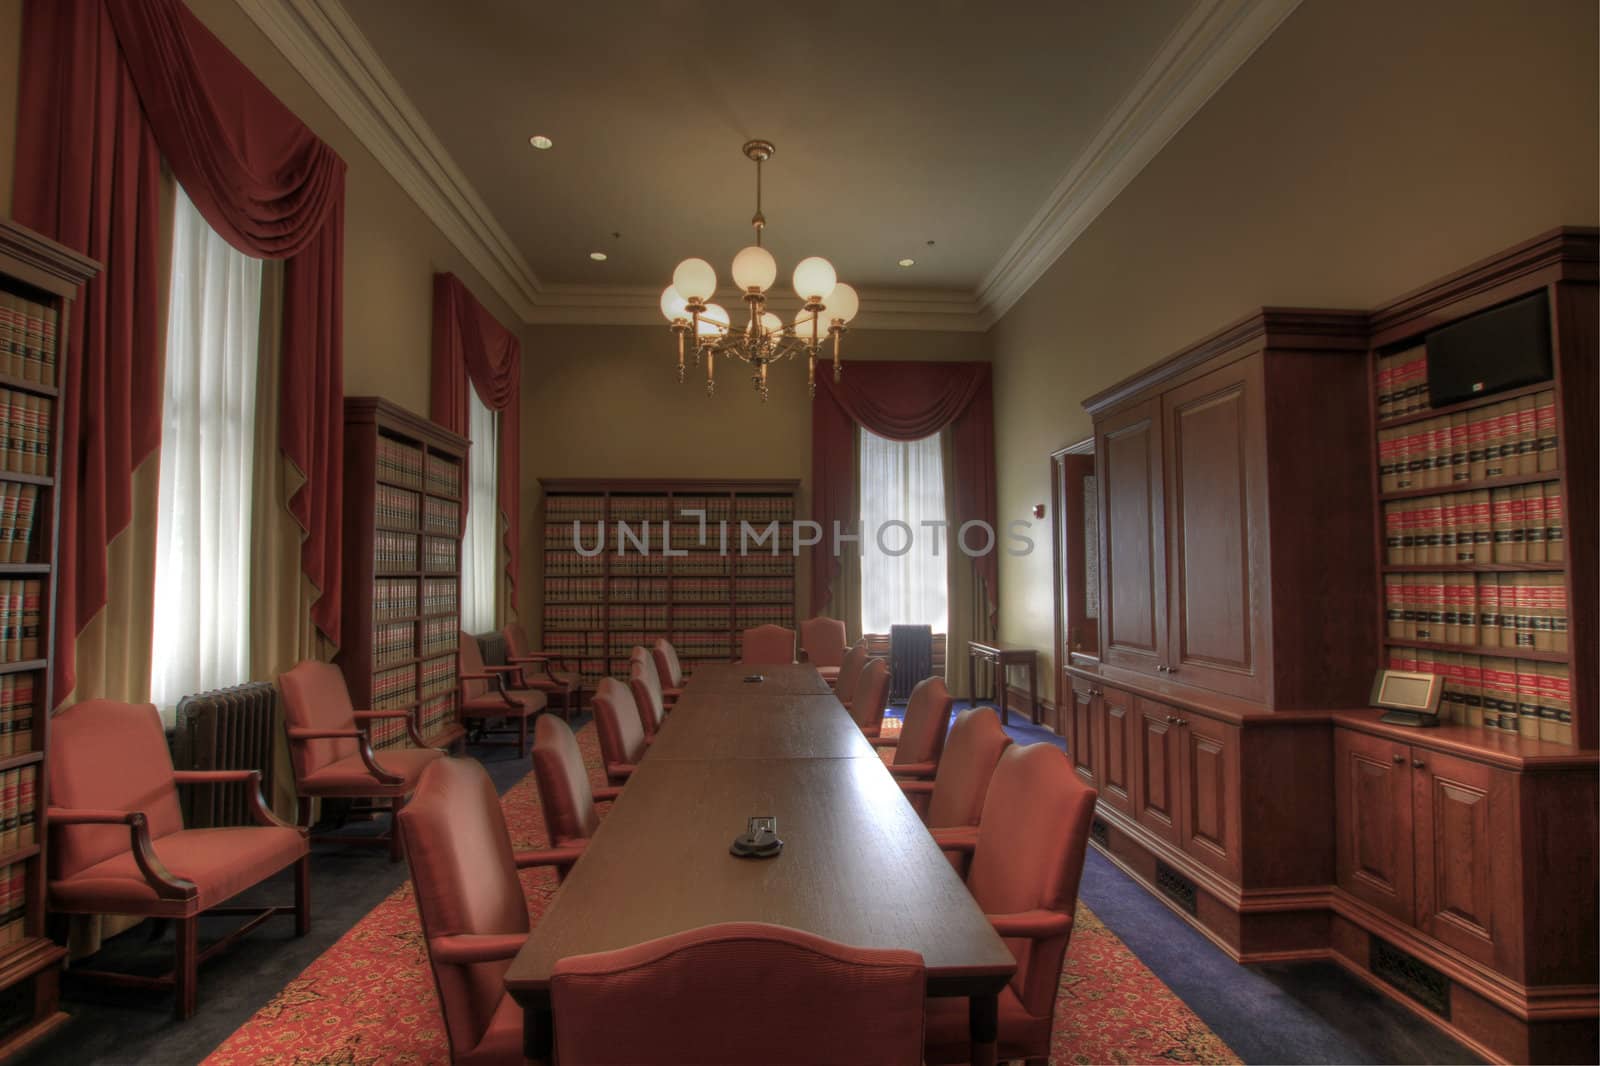 Law Library Meeting Room in Historic Building